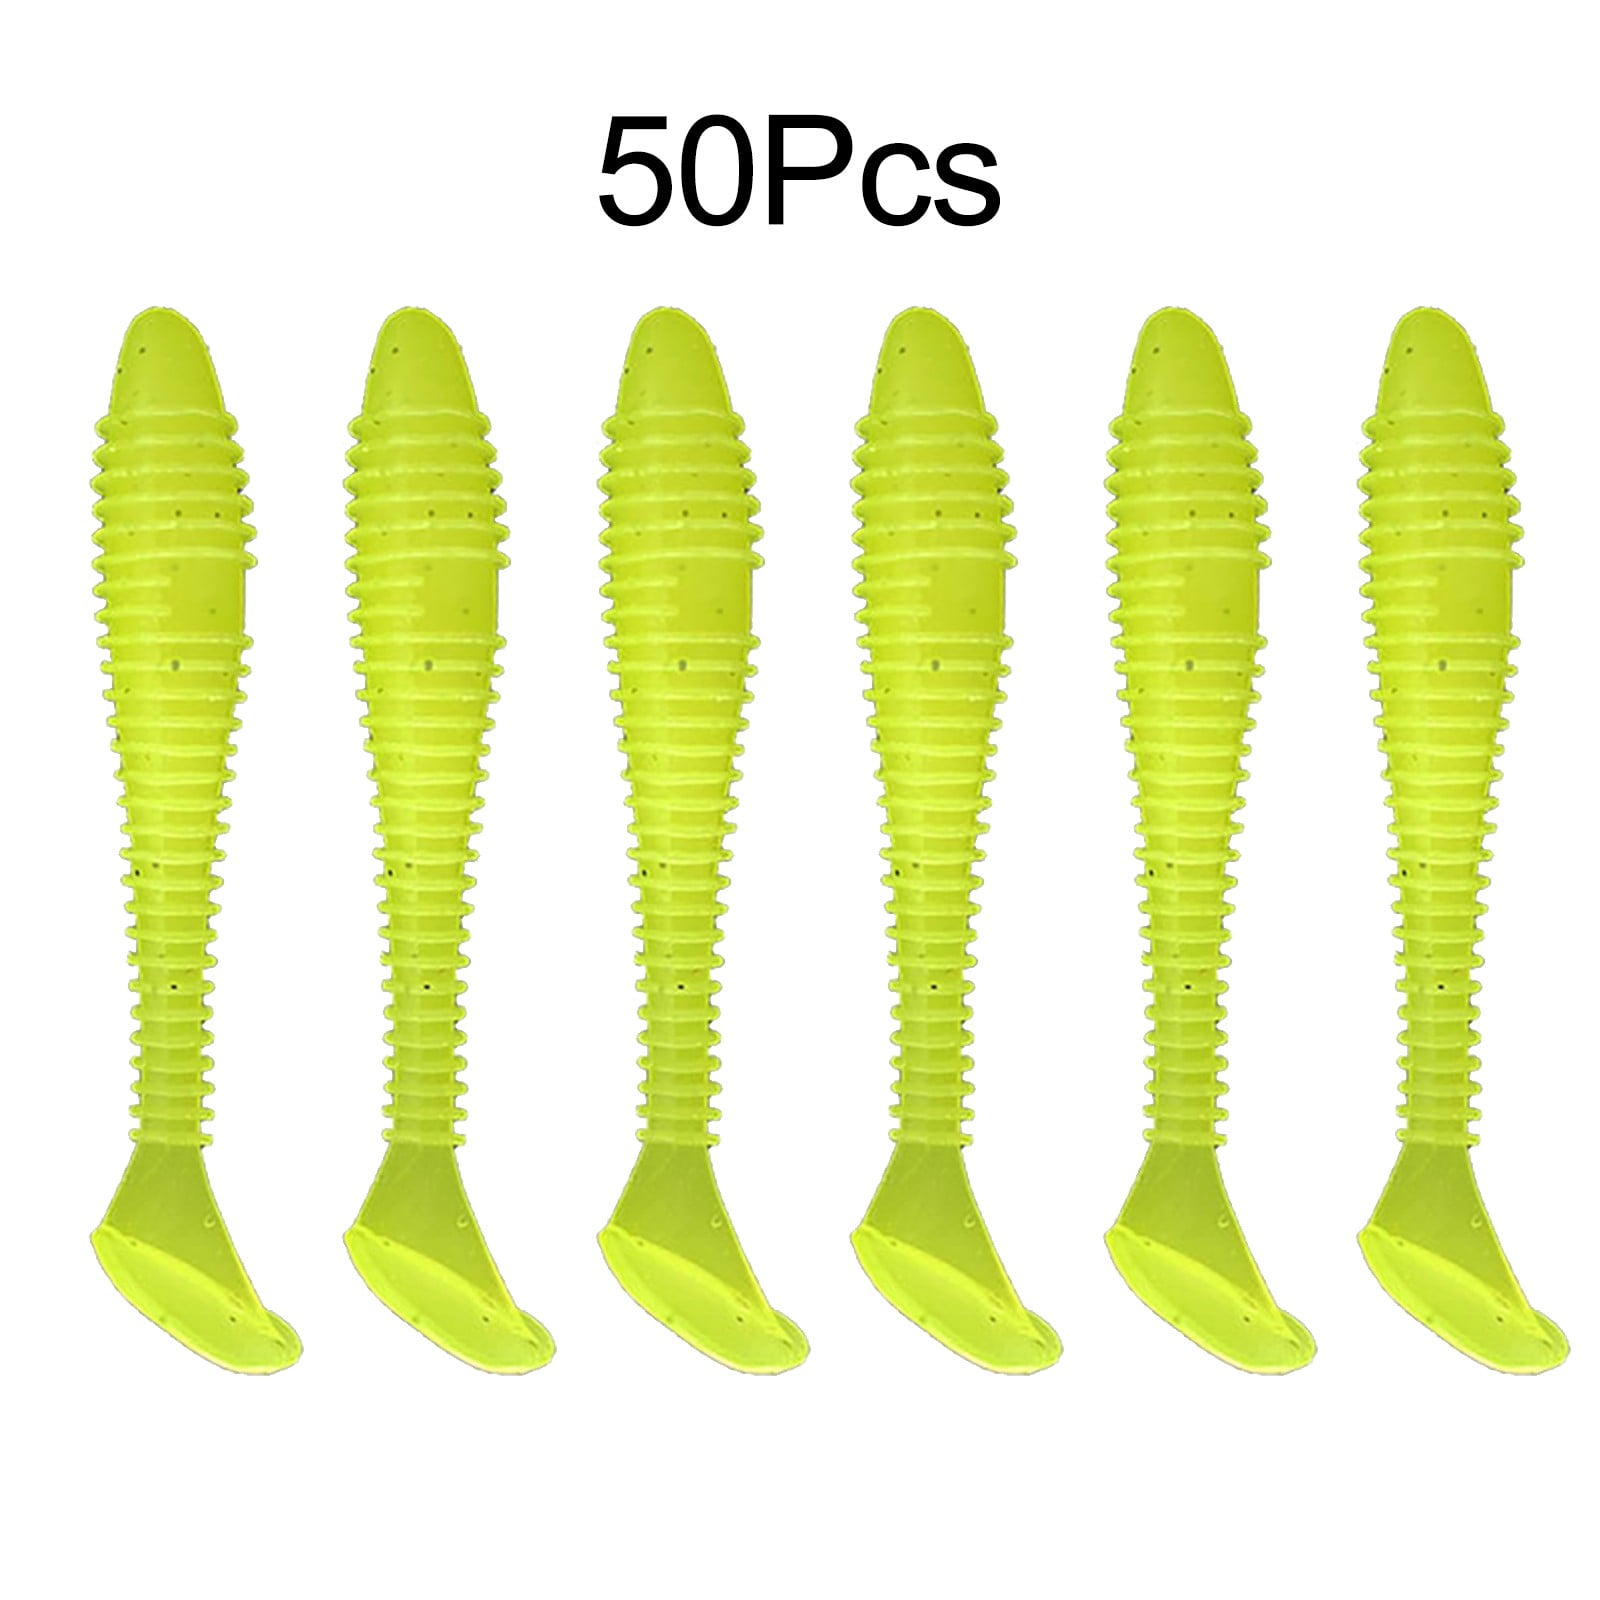 50 Soft Plastic Fishing Lure Tackle Paddle Tail Grub Worm Bream